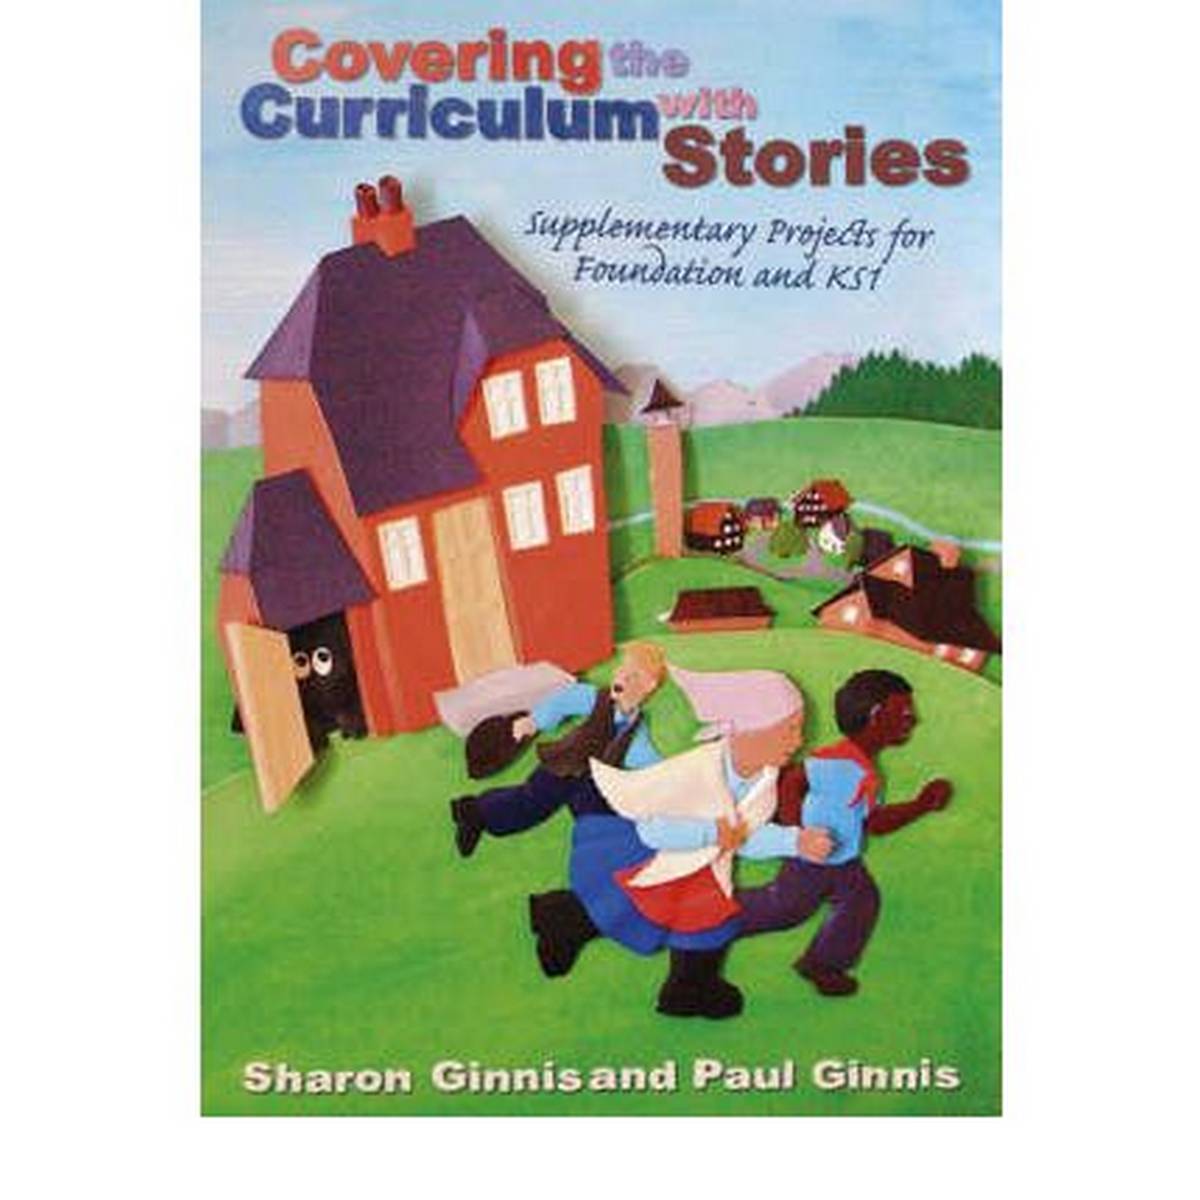 Covering the Curriculum with Stories- Supplementary Stories CD